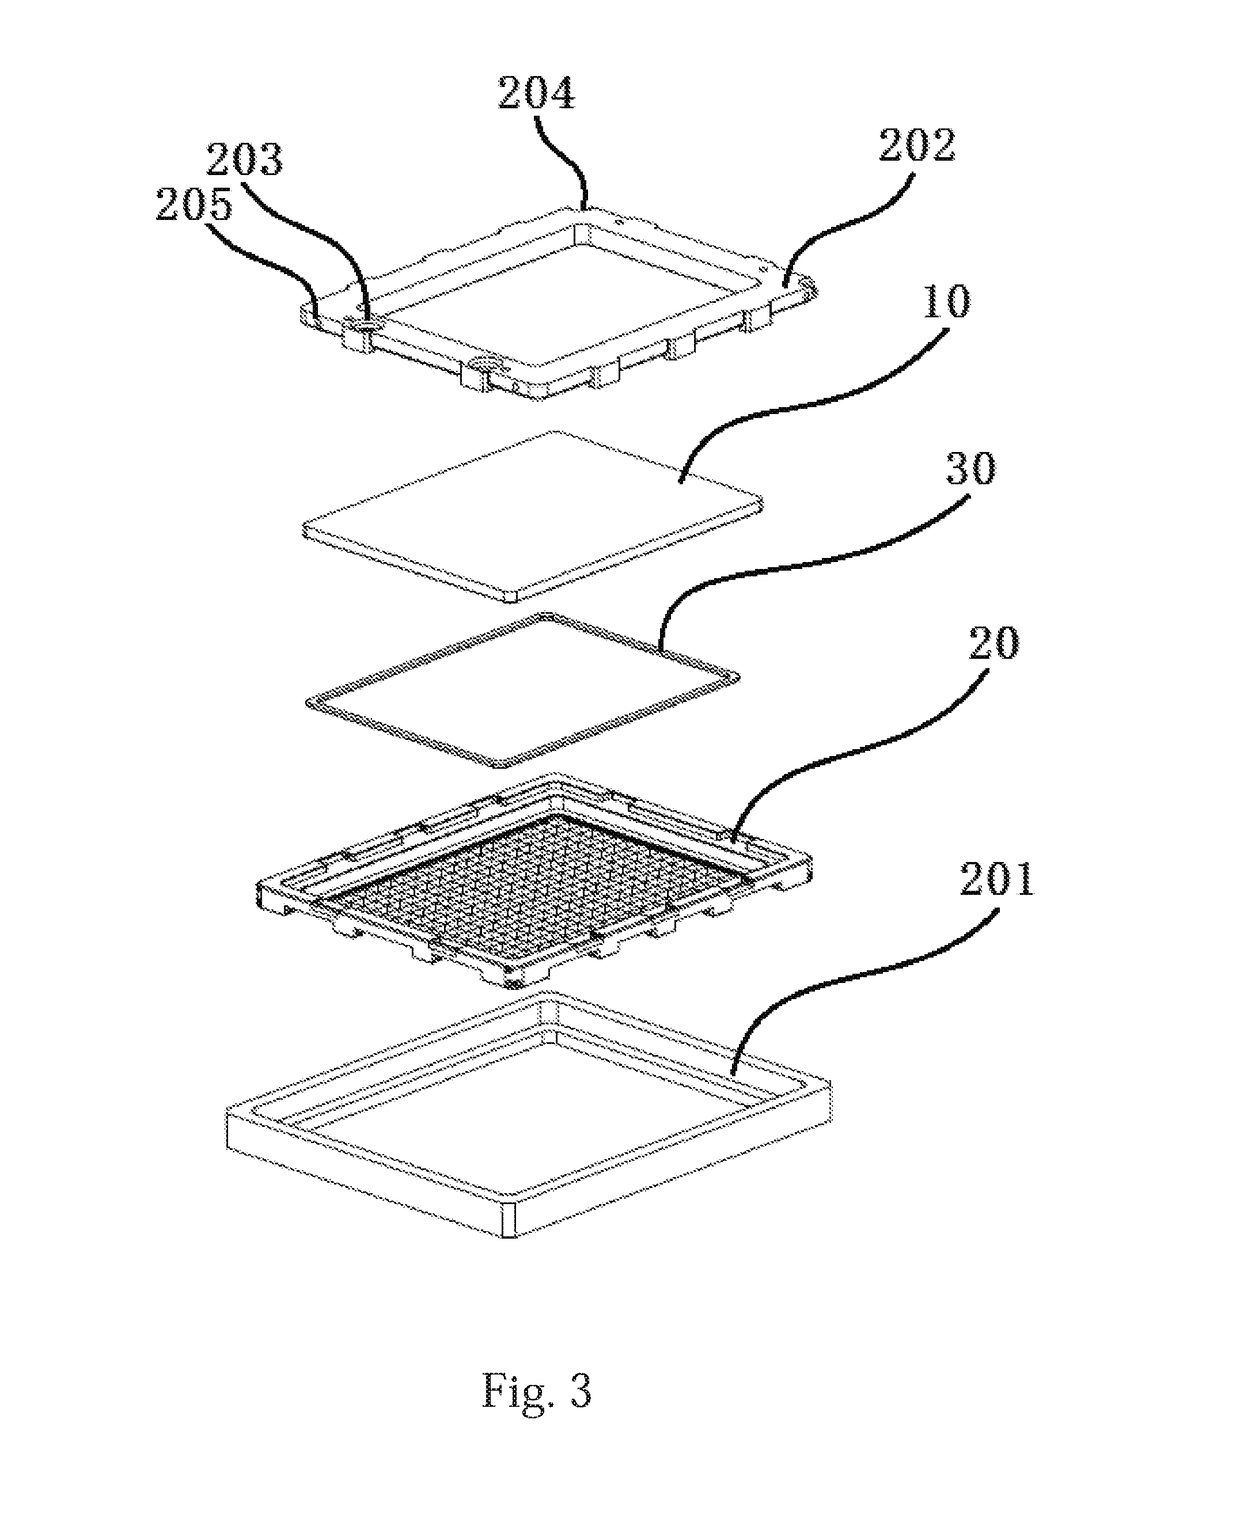 Packaging structure for waterproof LED lamp and method of making the same